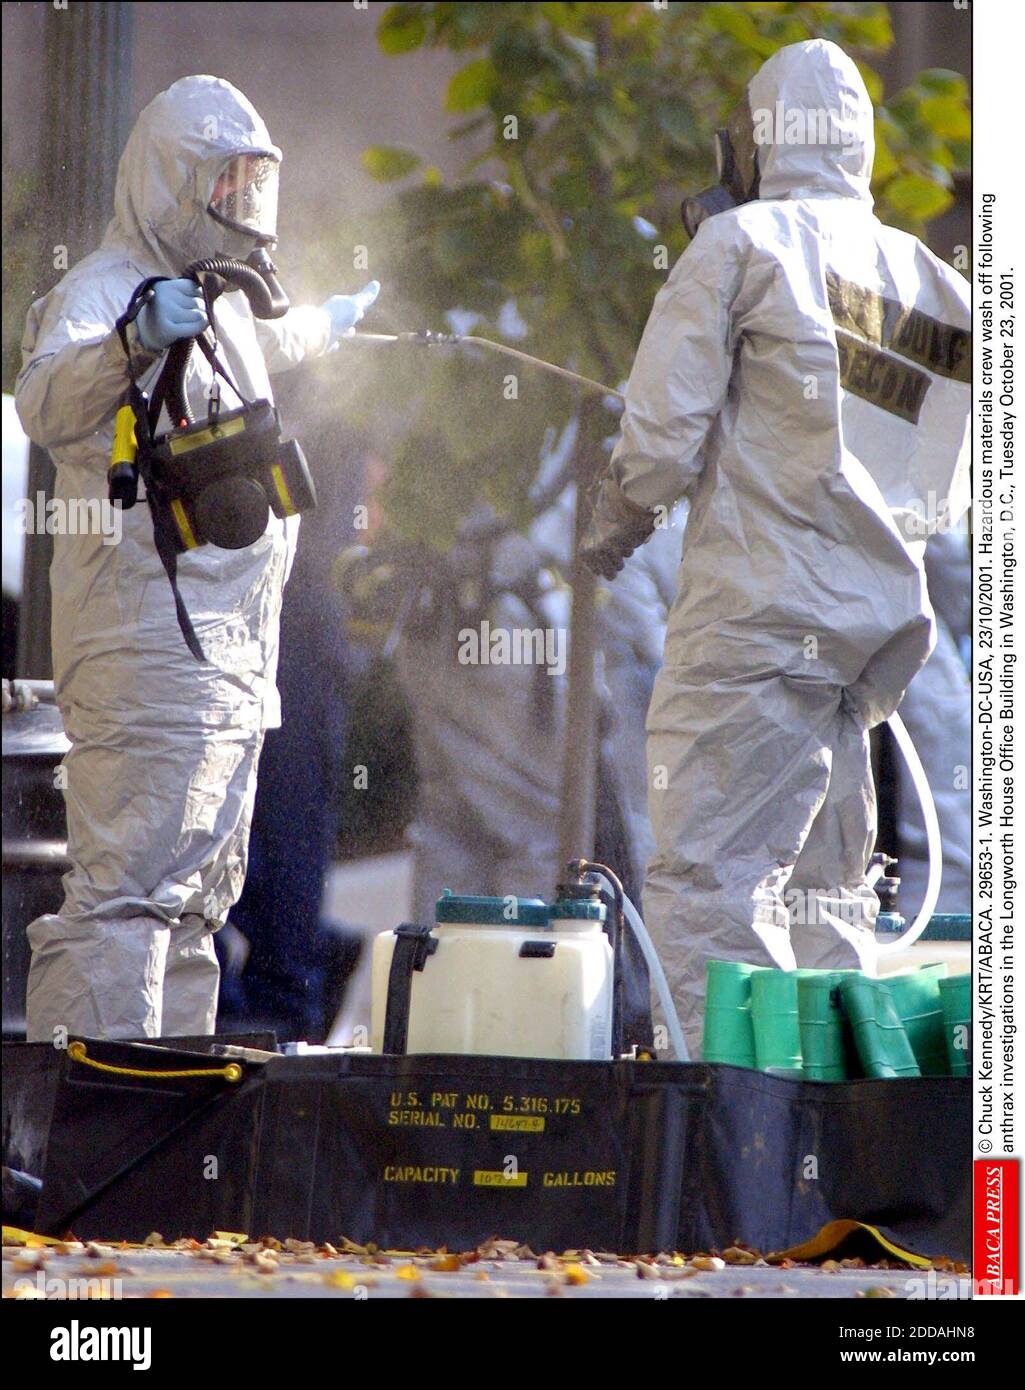 NO FILM, NO VIDEO, NO TV, NO DOCUMENTARY - © Chuck Kennedy/KRT/ABACA. 29653-1. Washington-DC-USA, 23/10/2001. Hazardous materials crew wash off following anthrax investigations in the Longworth House Office Building in Washington, D.C., Tuesday October 23, 2001. Stock Photo